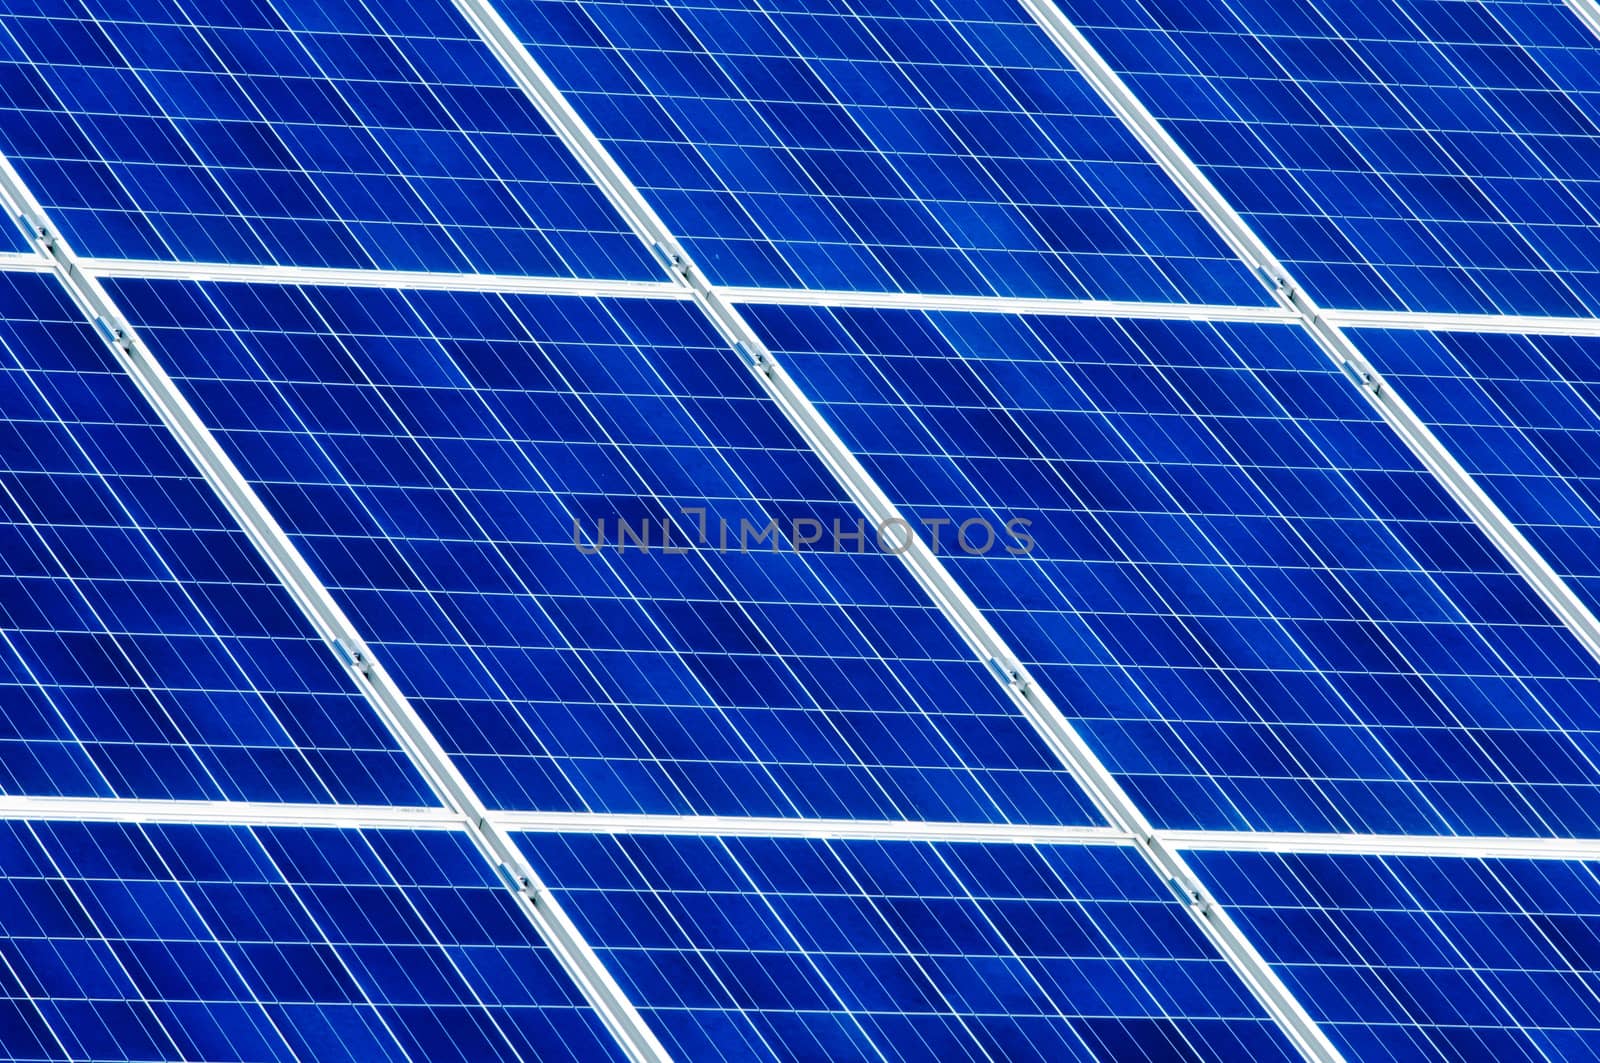 Photovoltaic solar cell panels by horizonphoto